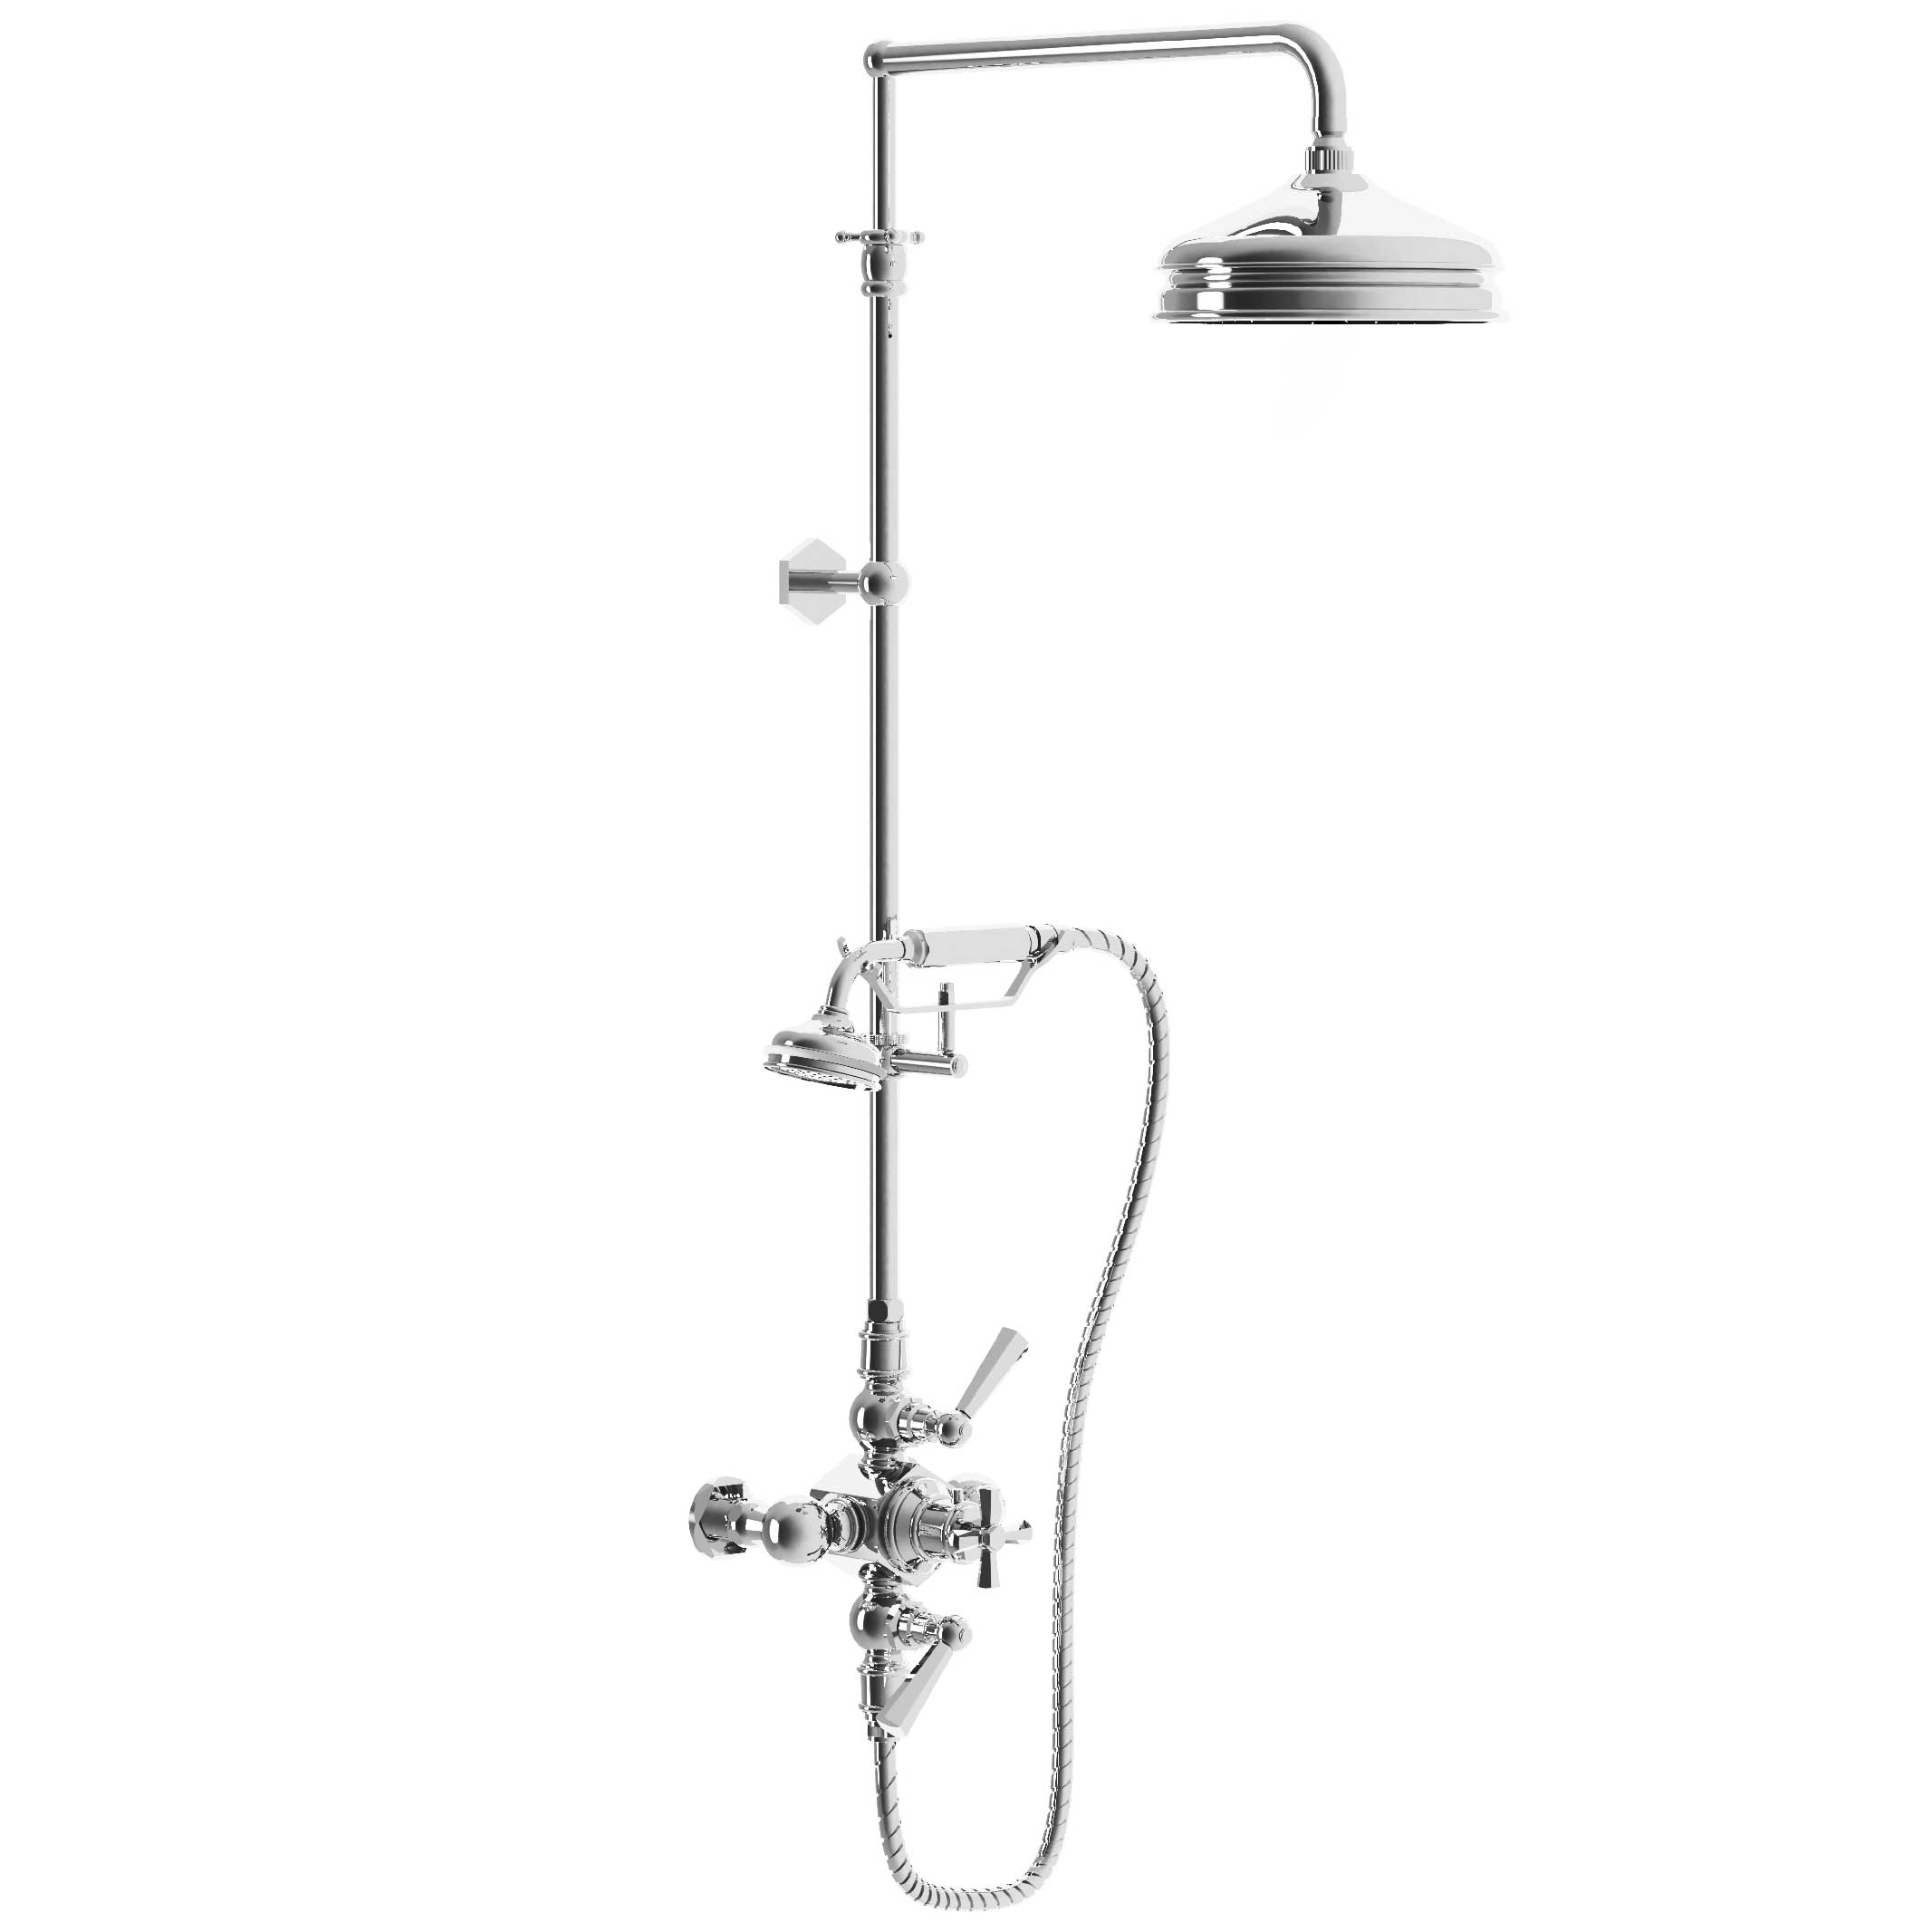 M13-2204T Thermo. shower mixer with column, anti-scaling